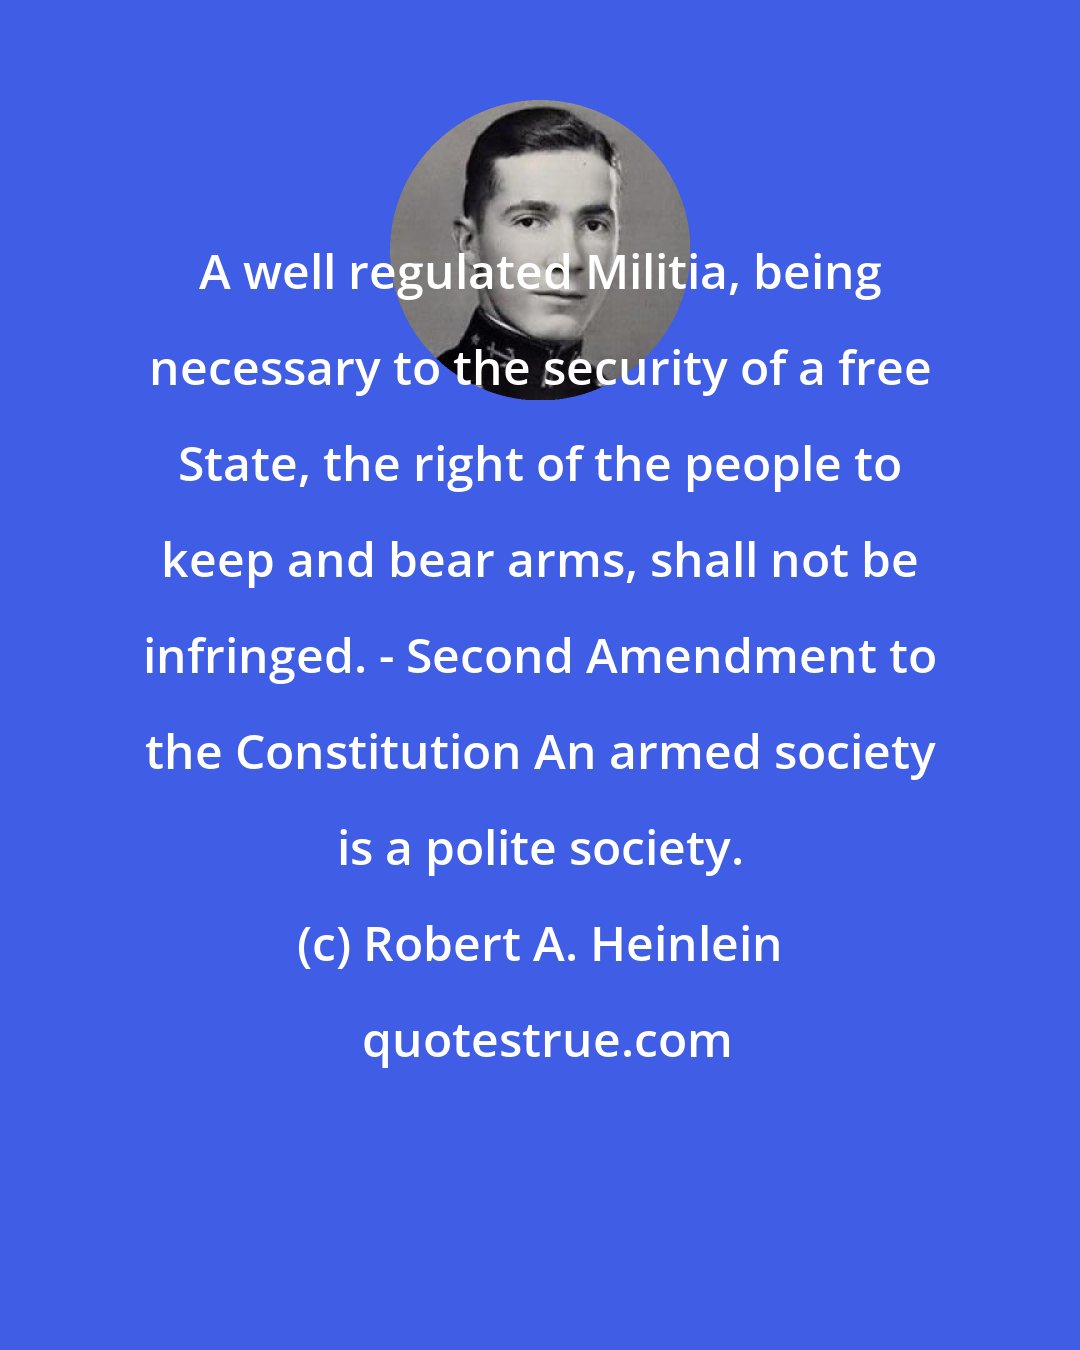 Robert A. Heinlein: A well regulated Militia, being necessary to the security of a free State, the right of the people to keep and bear arms, shall not be infringed. - Second Amendment to the Constitution An armed society is a polite society.